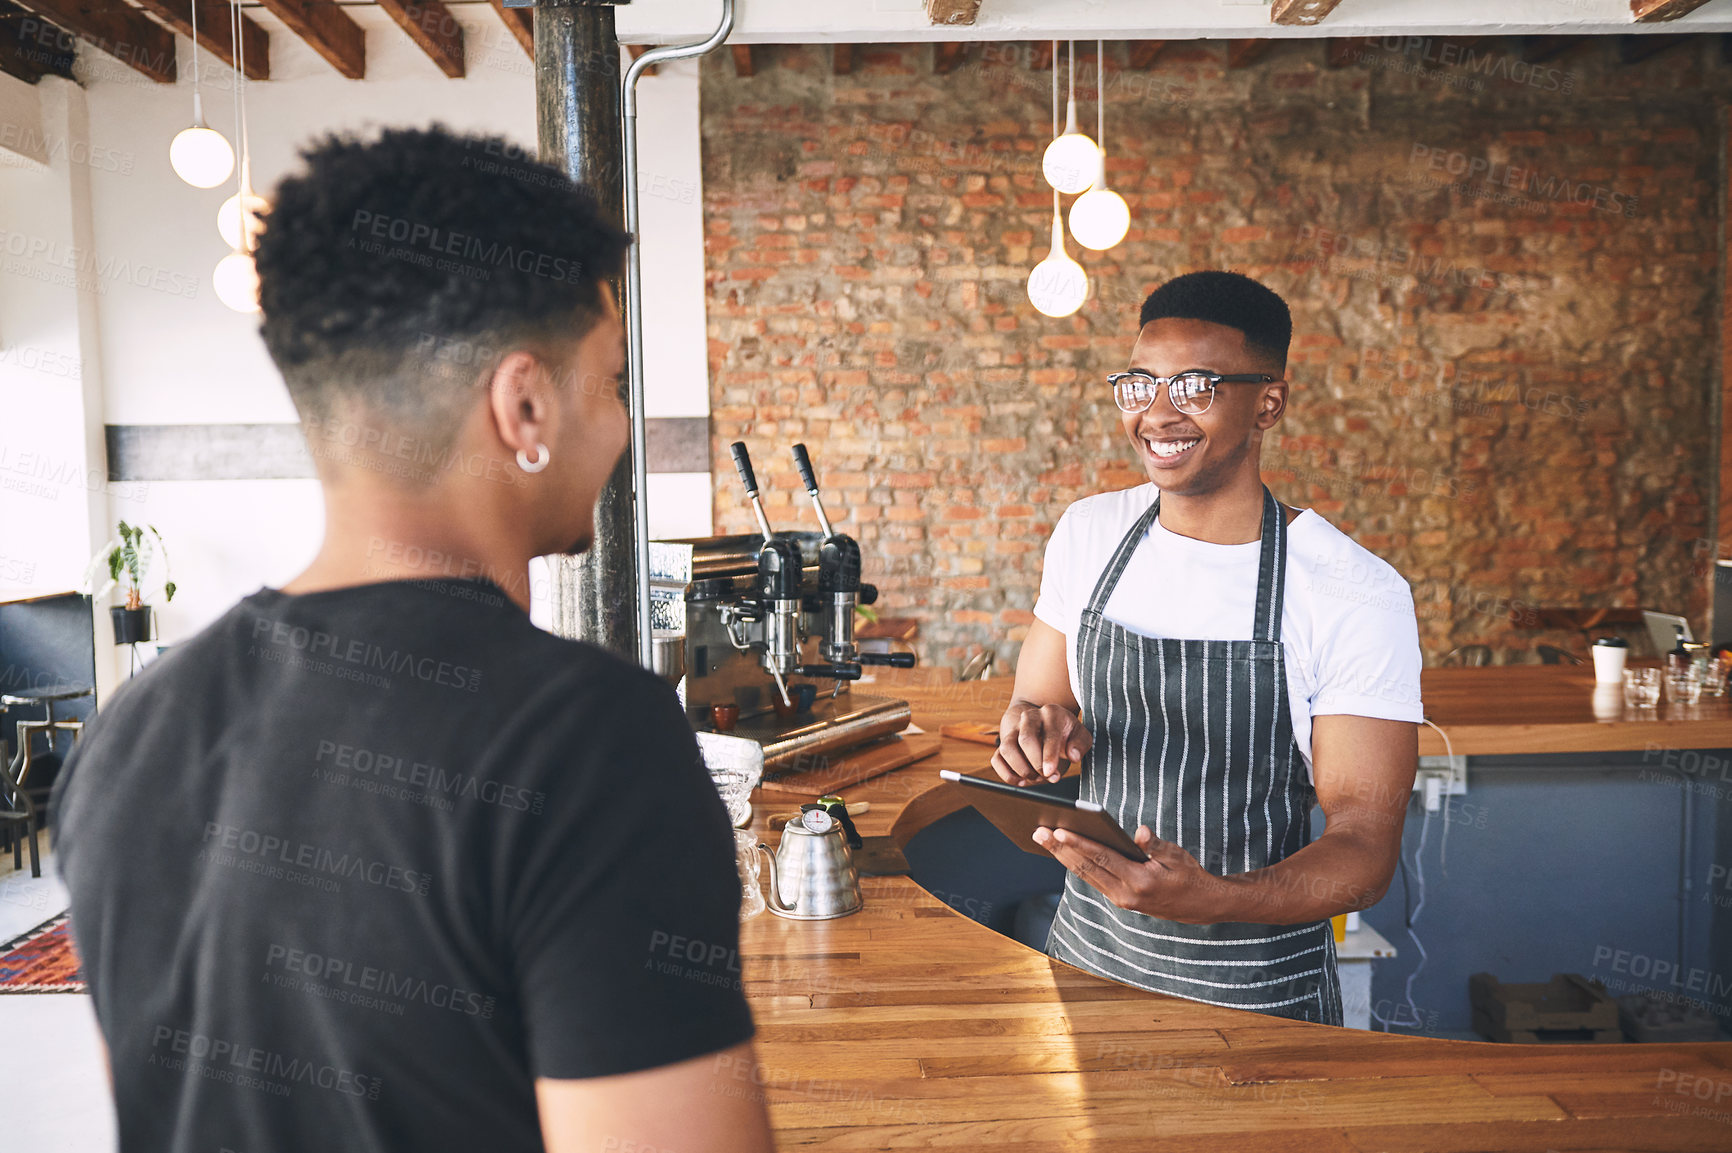 Buy stock photo Shot of a young man using a digital tablet while serving a customer in a cafe